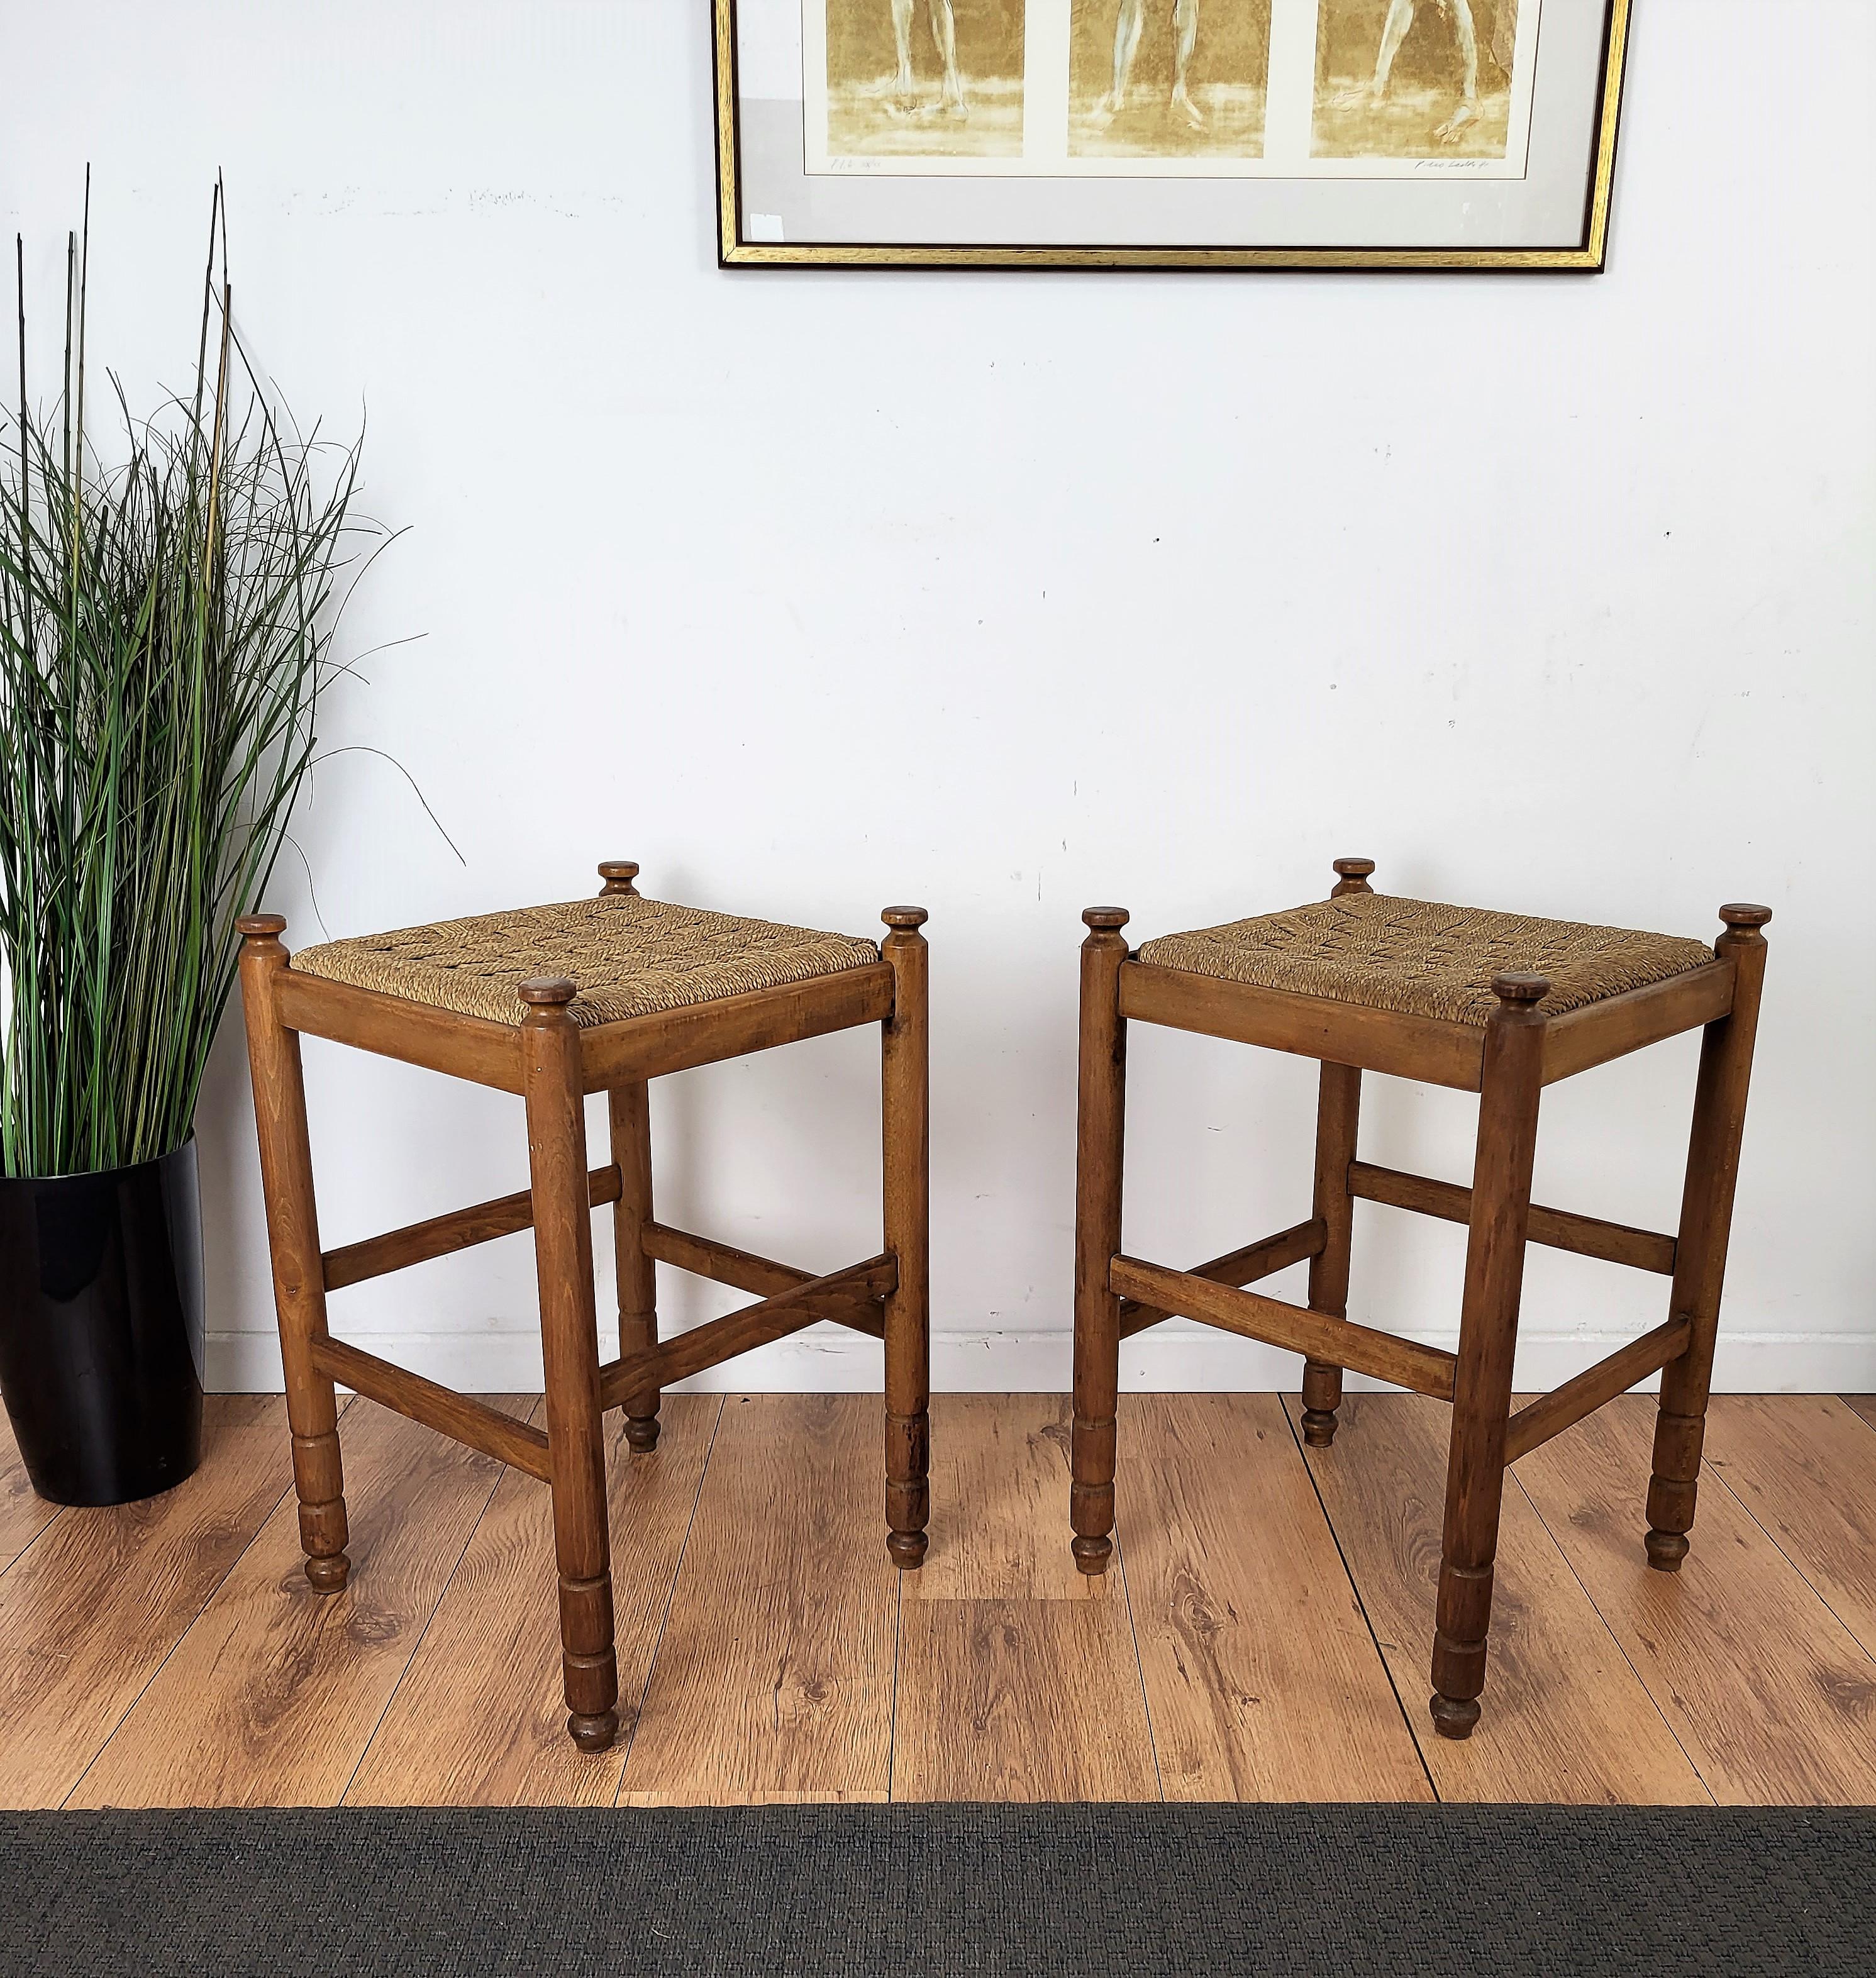 Stylish and beautiful pair of 1960s Mid-Century Modern stools in wood and cord or woven rope, in the style of Audoux Minet with carved decorated legs. The traditional and classical design and shape of the wooden structure, typical of Mid-Century